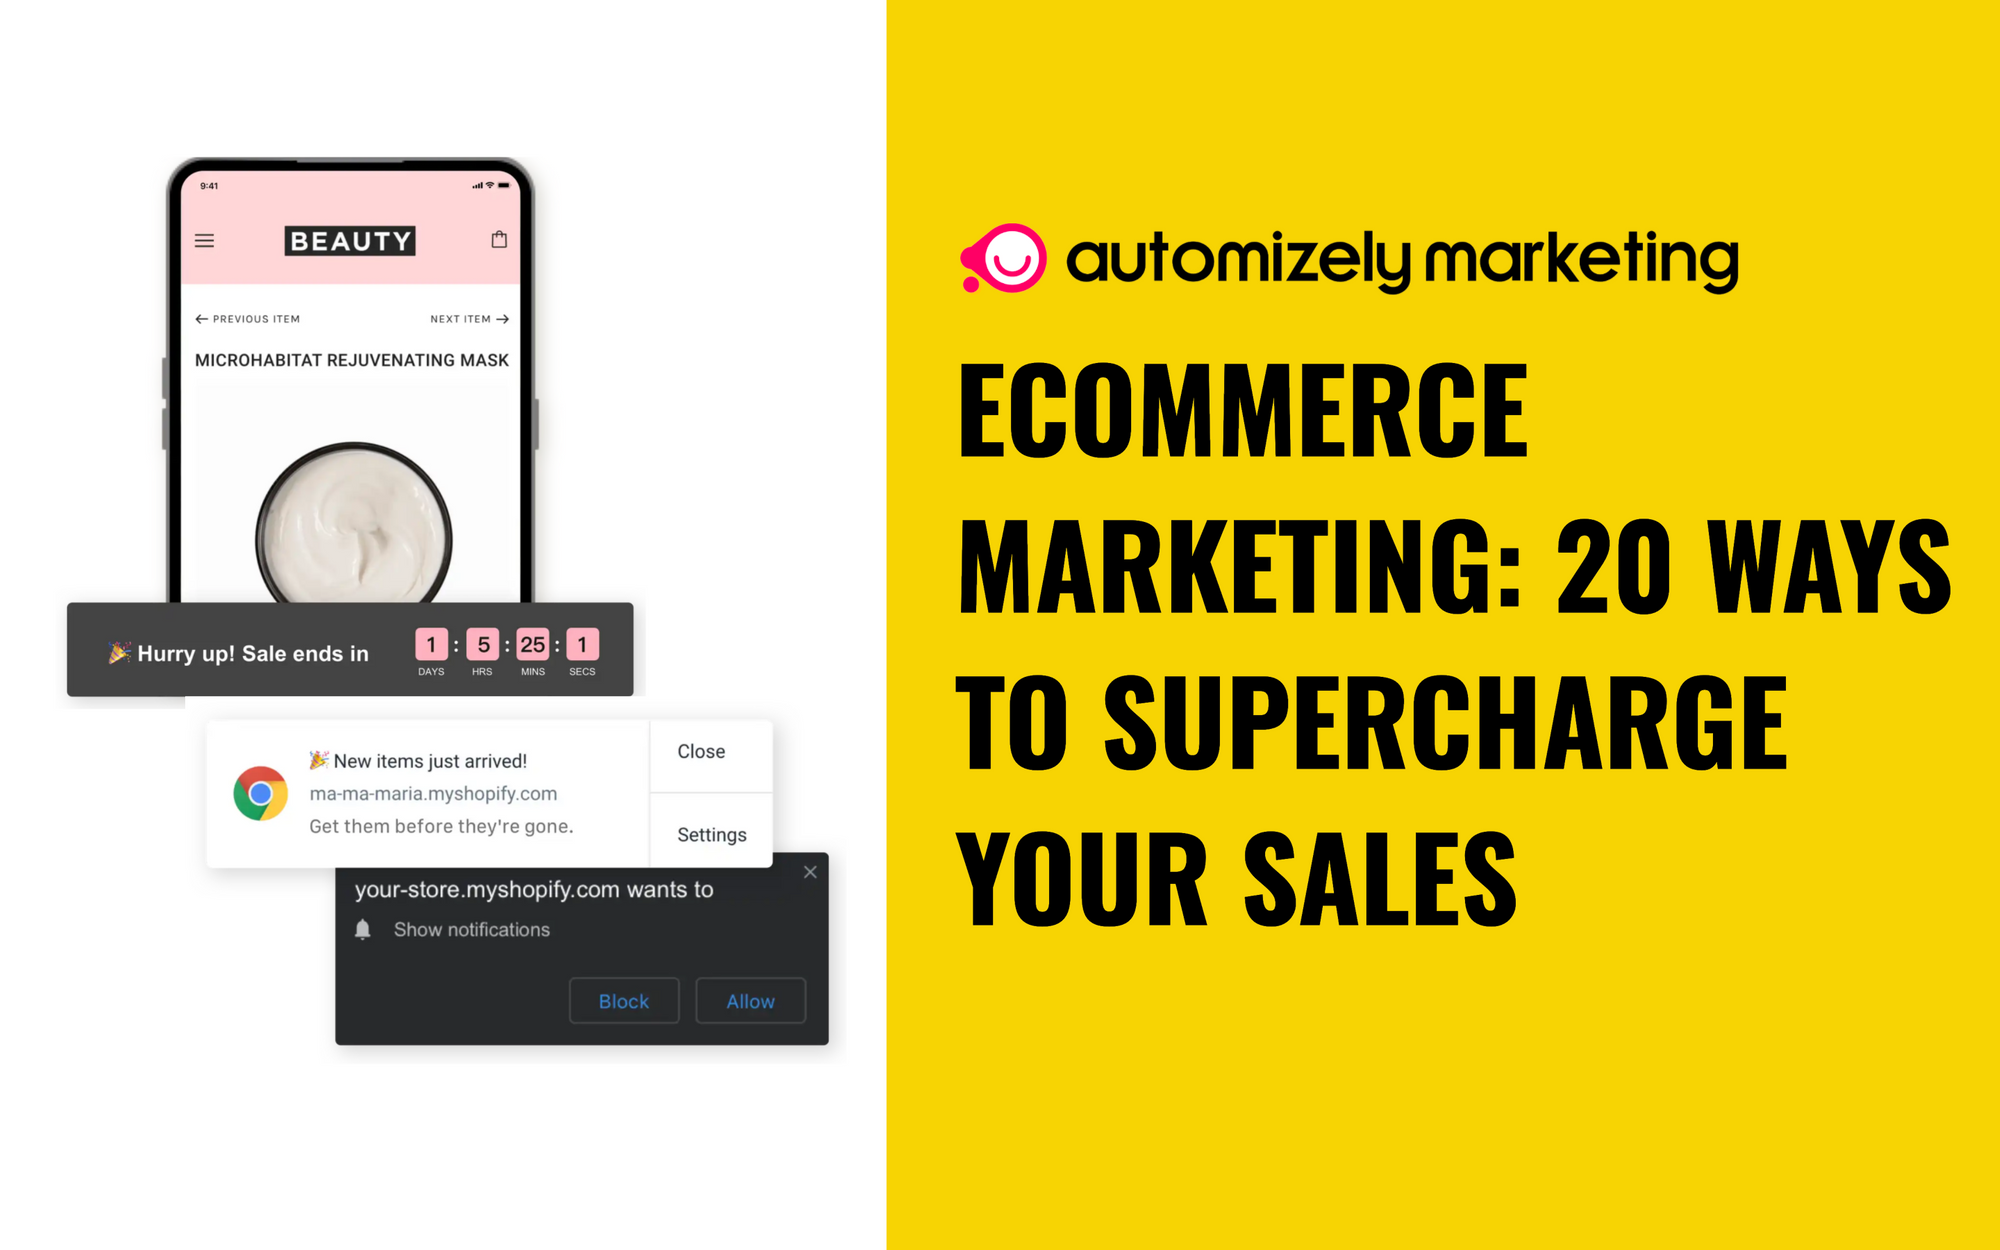 Ecommerce Marketing: 20 Ways to Supercharge Your Ecommerce Sales